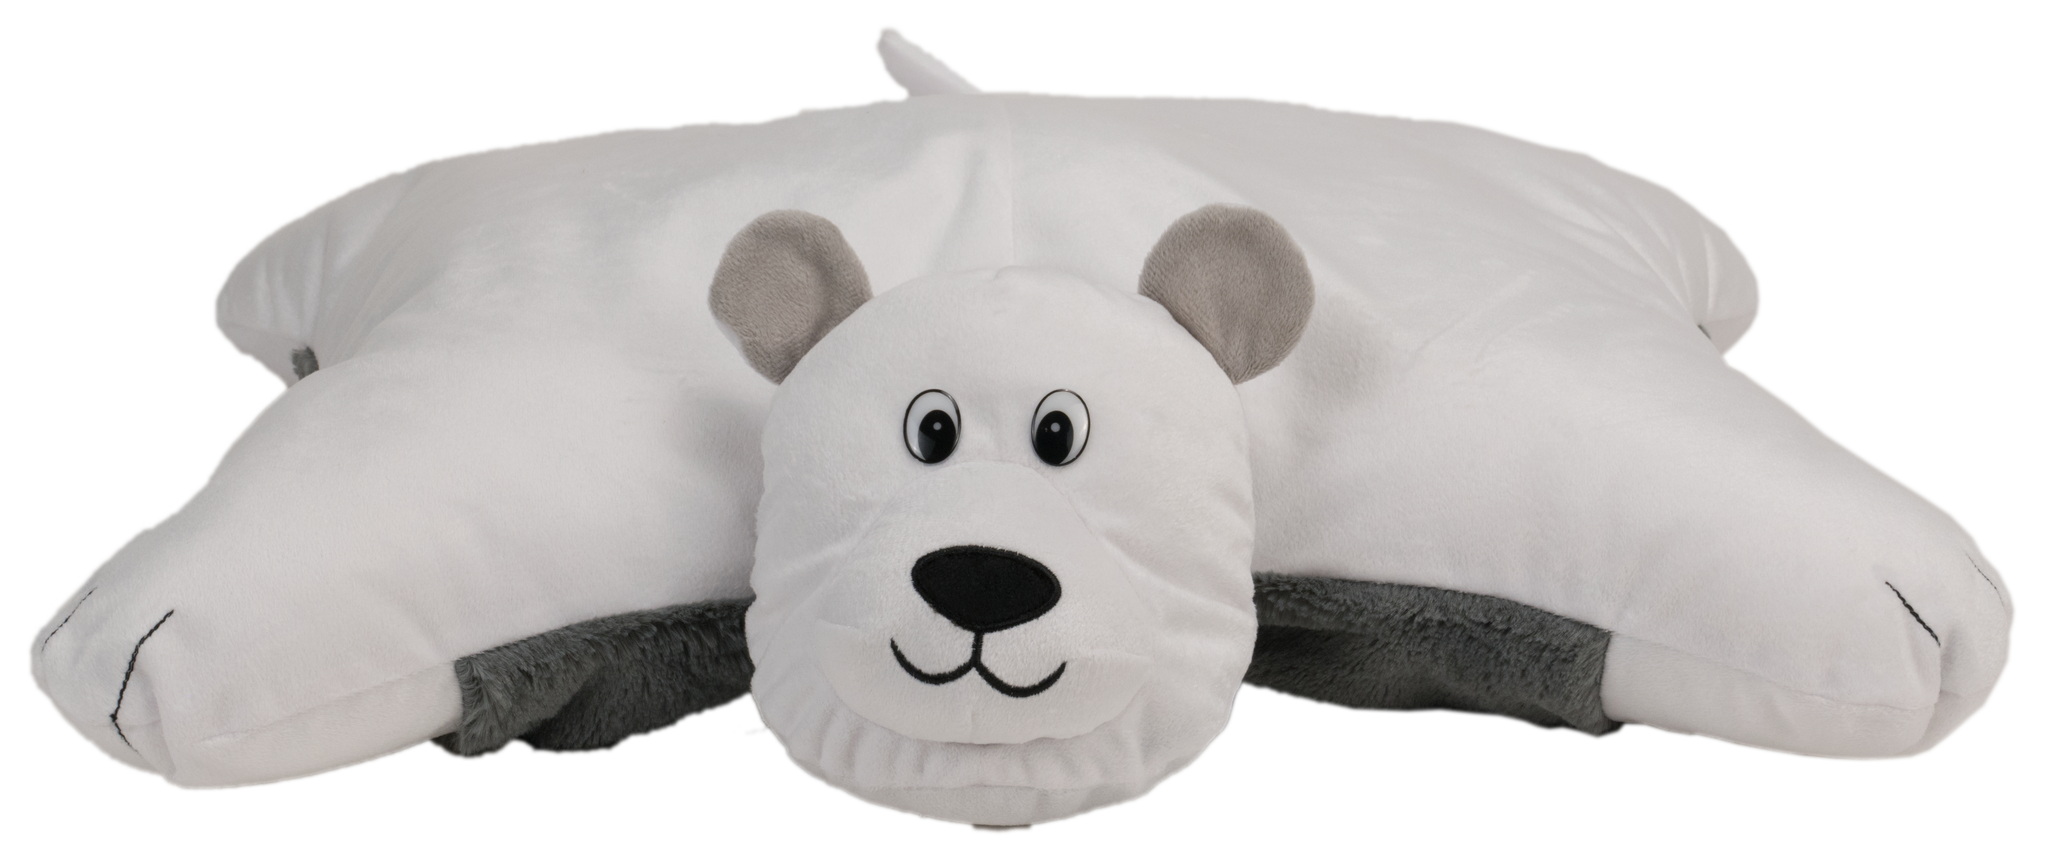 Flip 'N Play Friends 2 in 1 Plush to Pillow Husky to Polar Bear - image 2 of 3